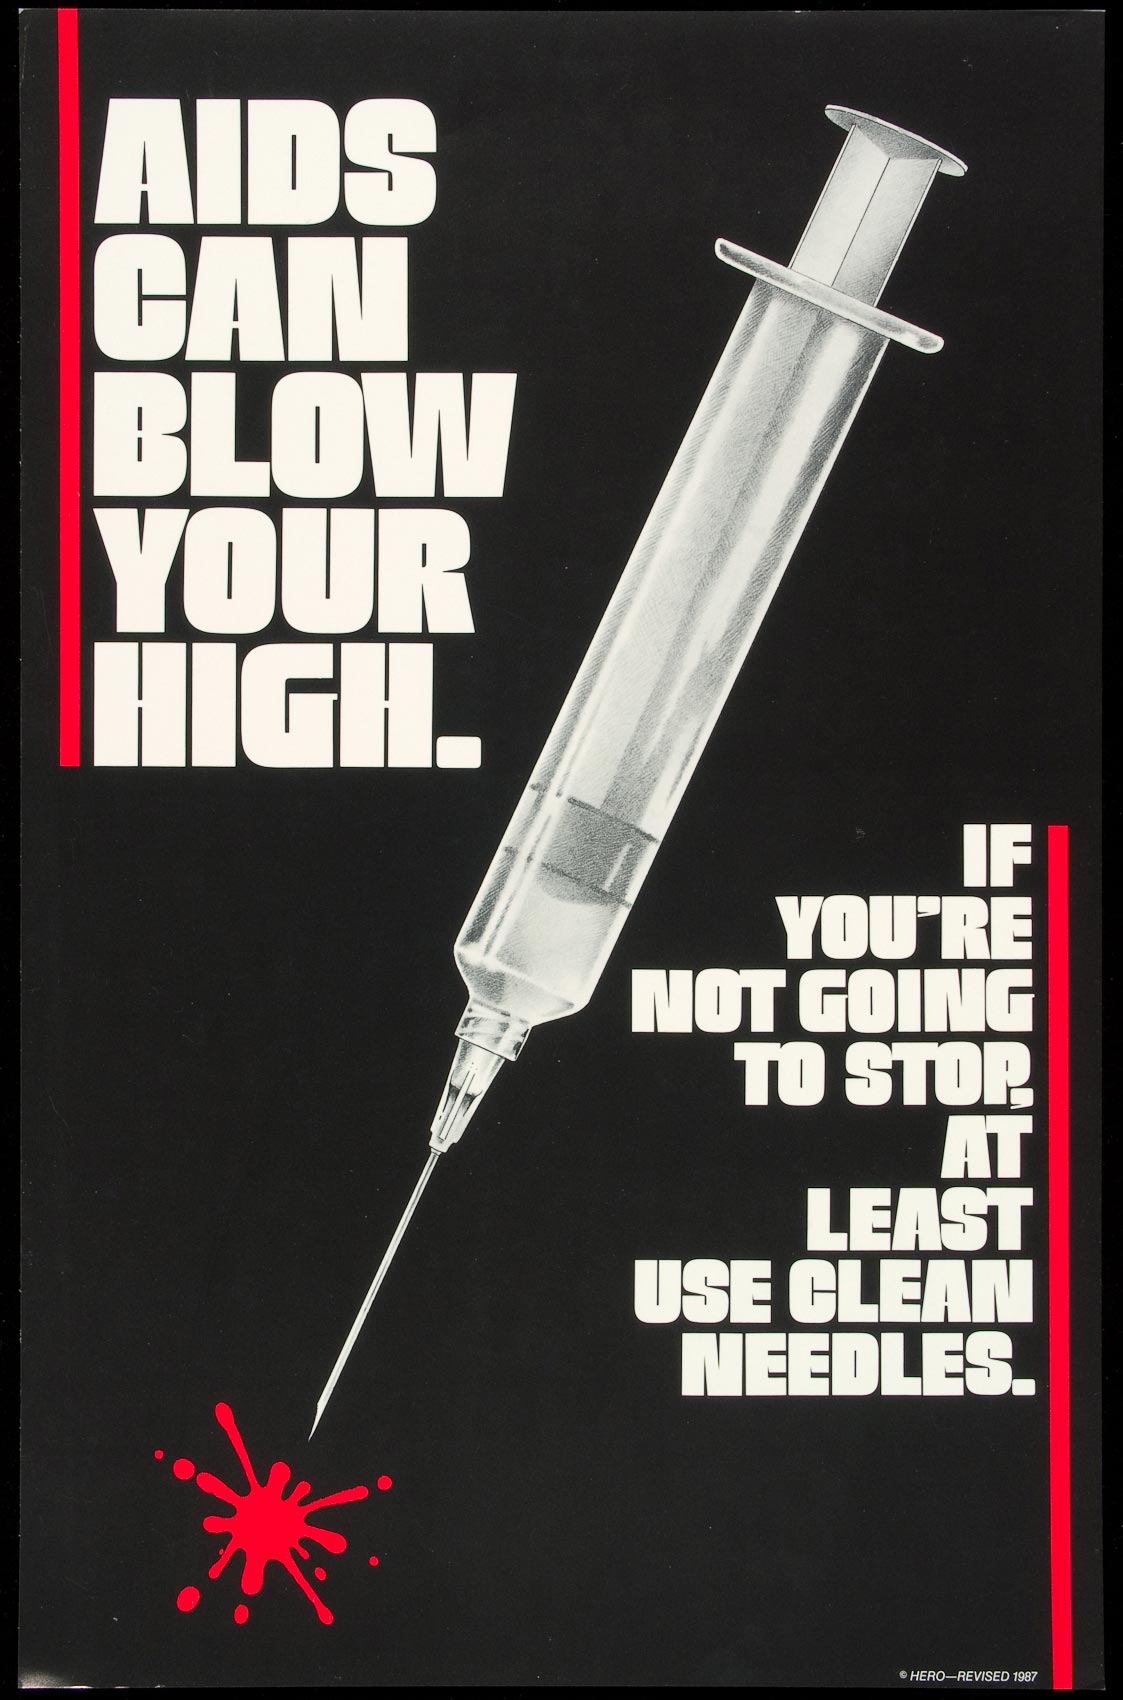 AIDS Can Blow Your High. 1986, HERO (Health Education Resources Organization) Baltimore, Maryland